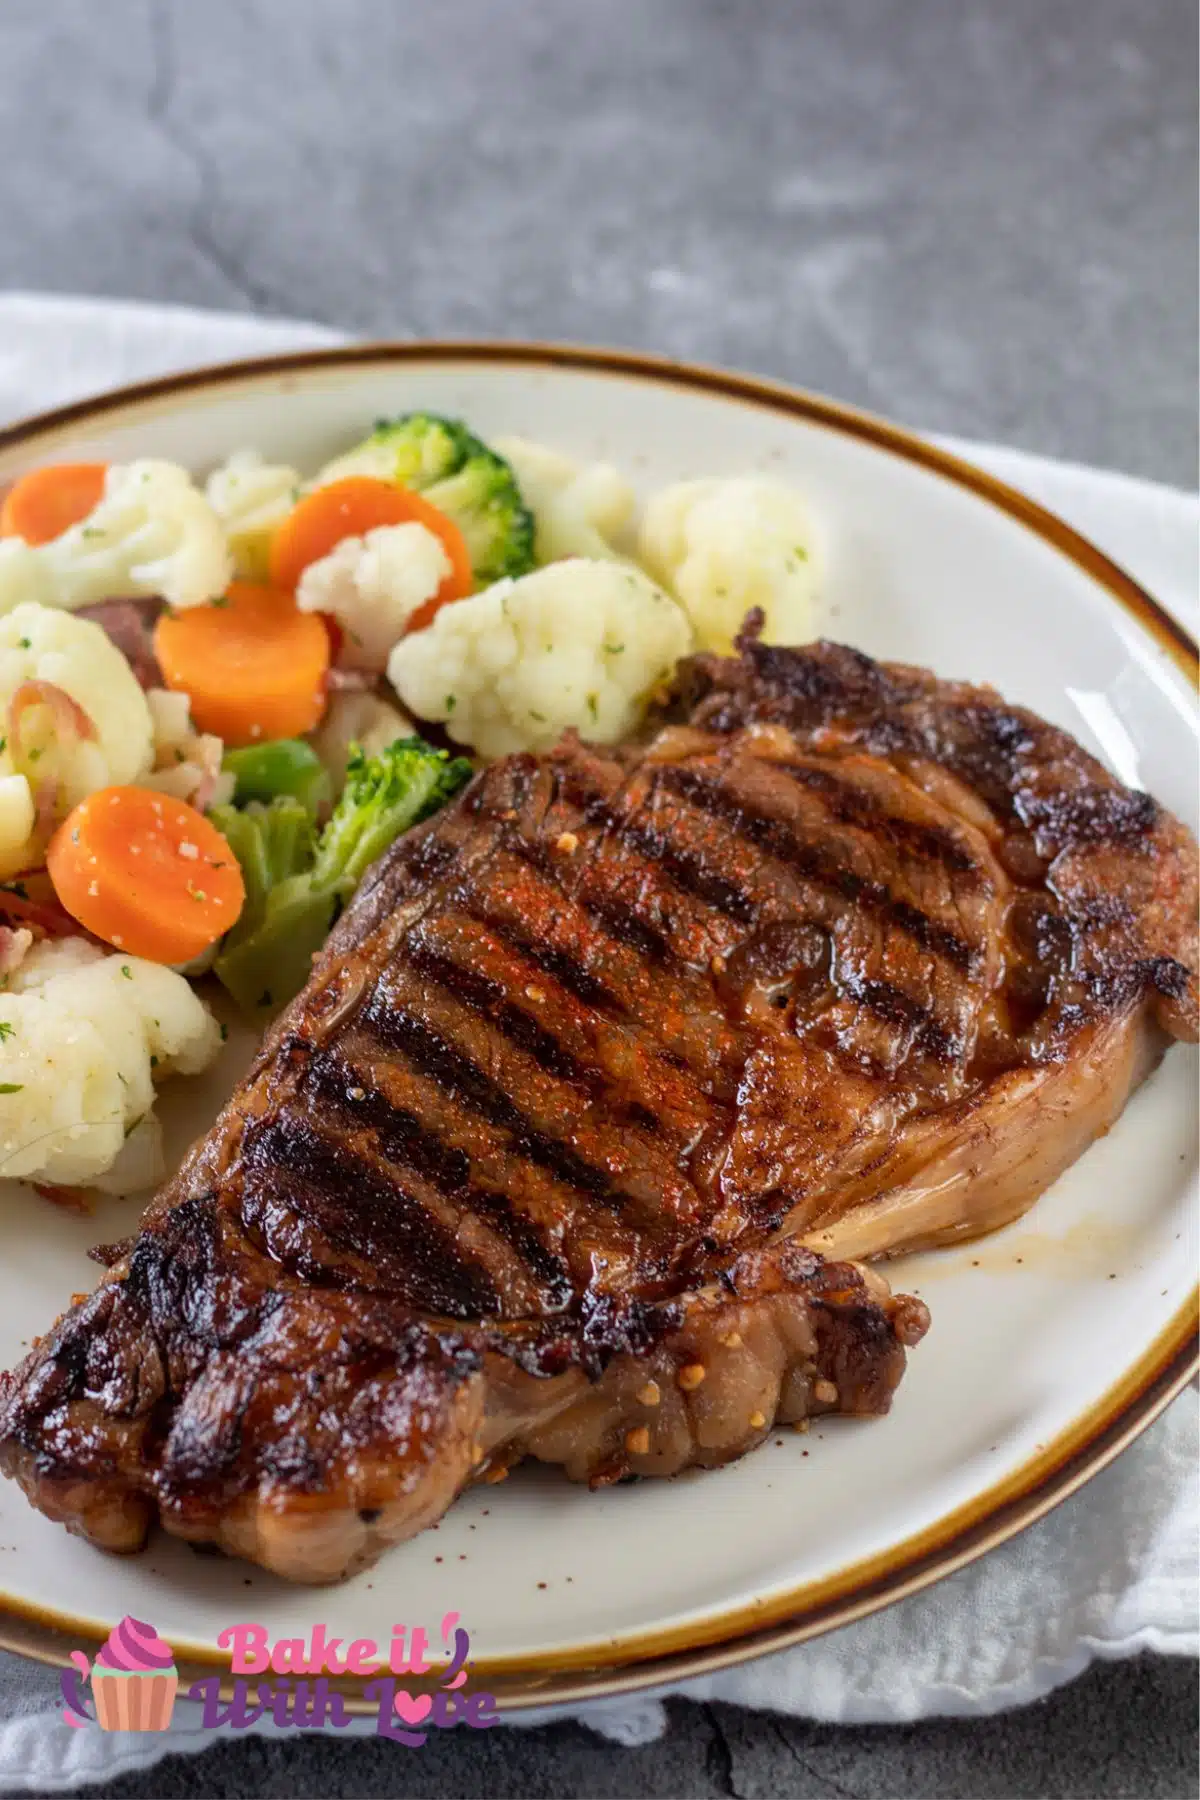 Tender grilled ribeye with steak marinade served on tan plate with veggie blend.